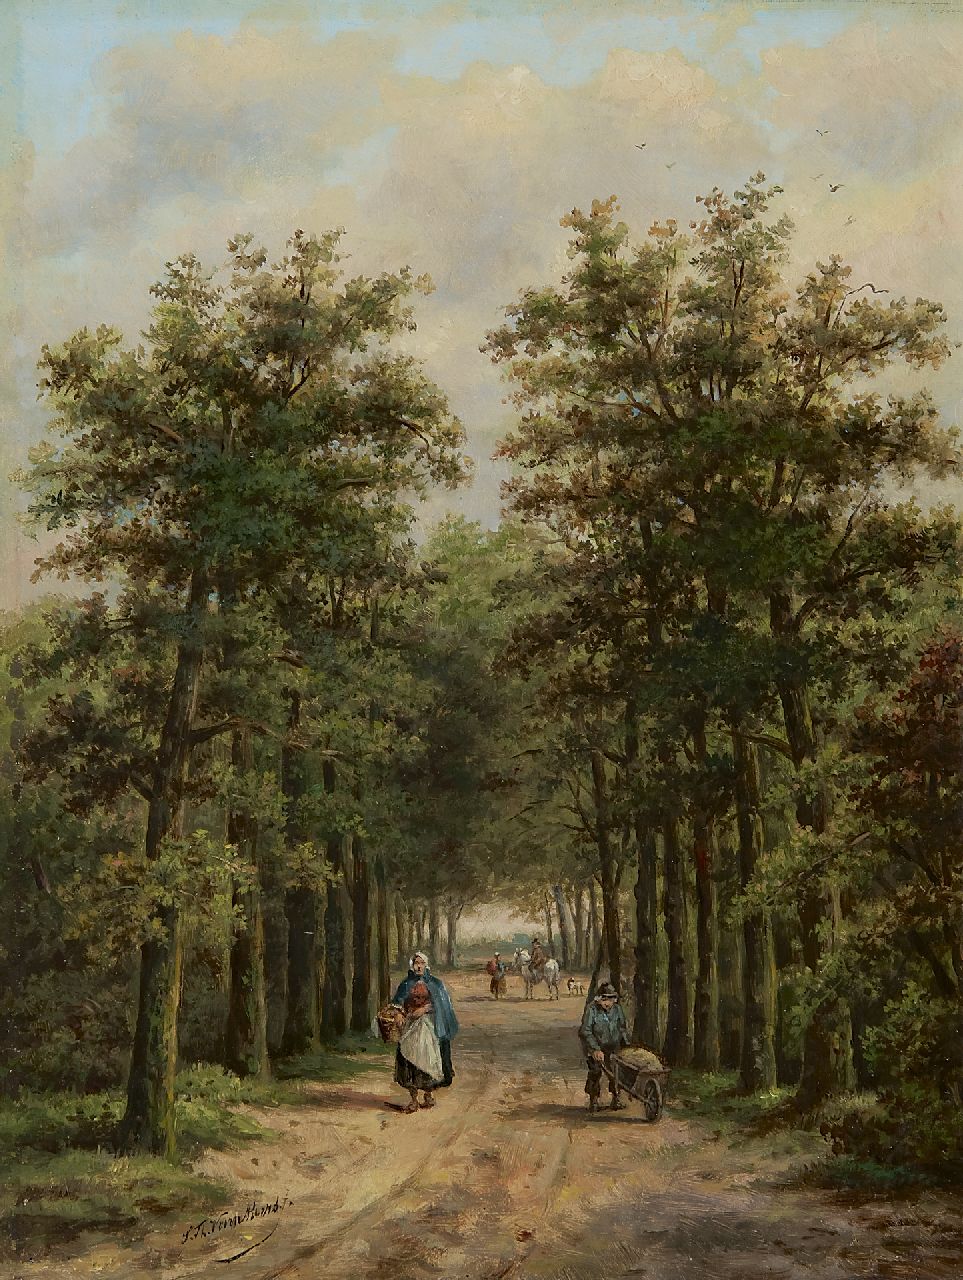 Voorn Boers S.T.  | Sebastiaan Theodorus Voorn Boers, Land folk on a sunny forest path, oil on panel 34.0 x 25.6 cm, signed l.l.